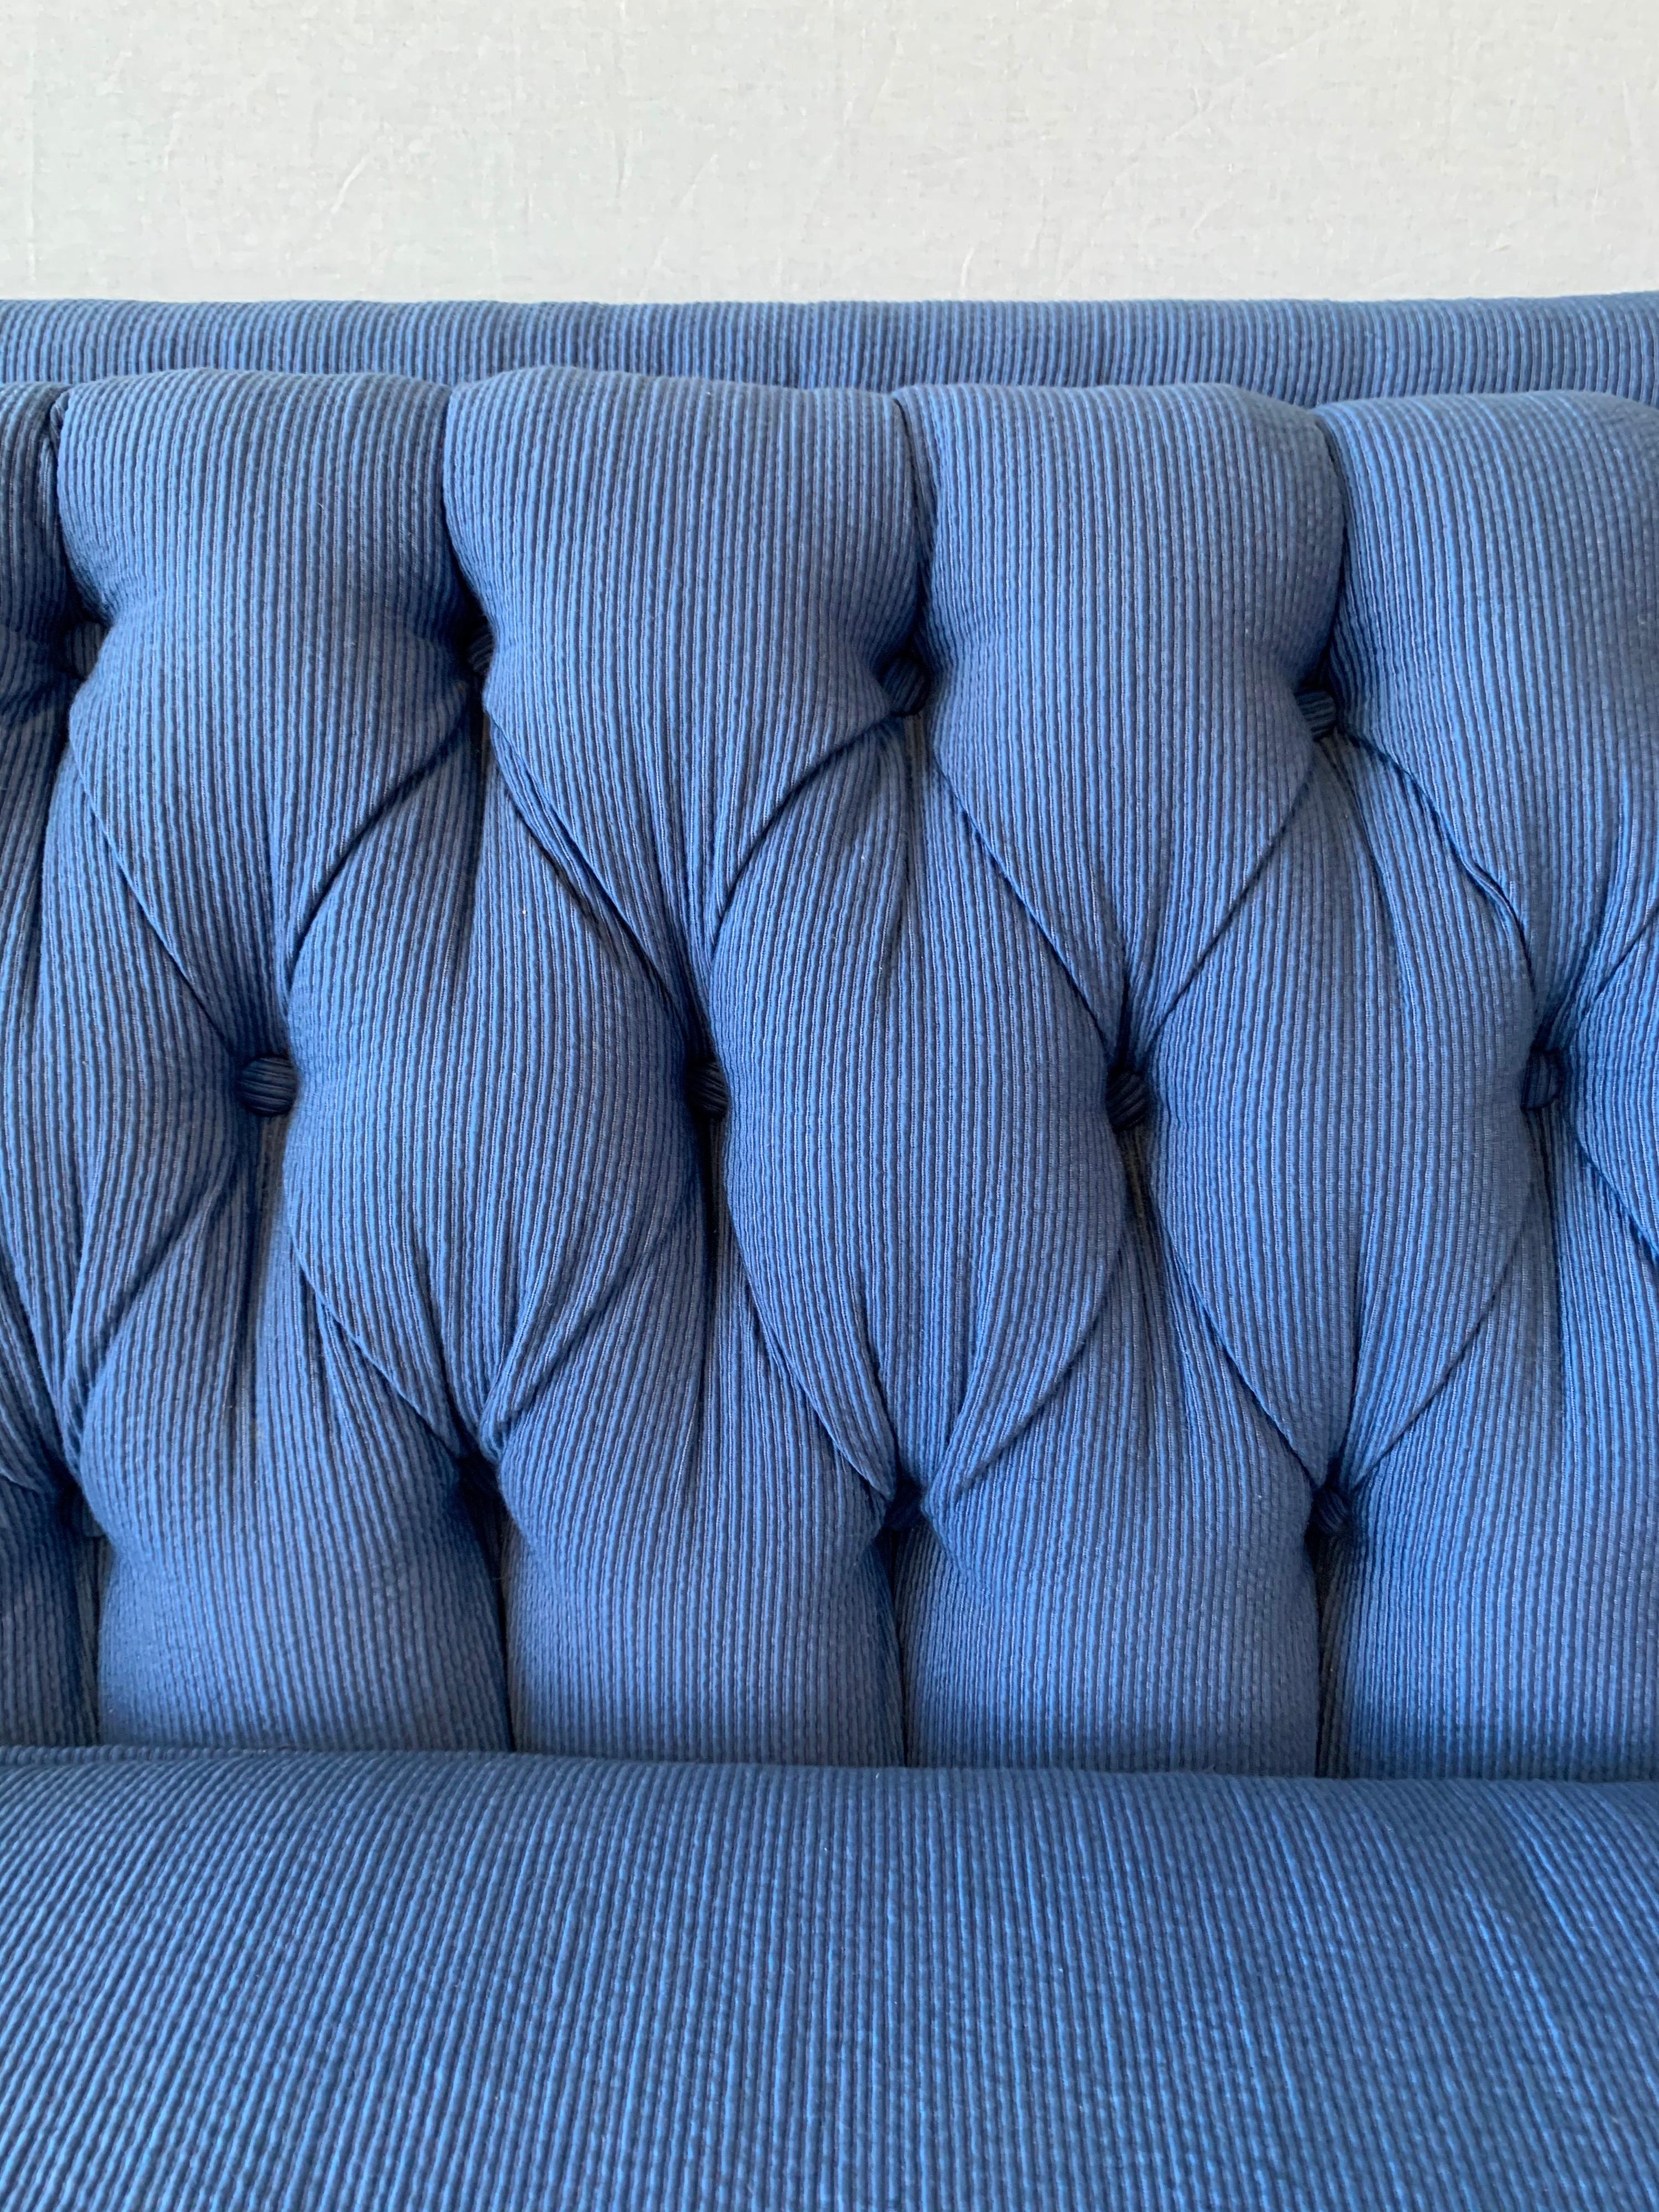 French Carved Fruitwood Pantone Blue Tufted Chesterfield Sofa In Good Condition In West Hartford, CT